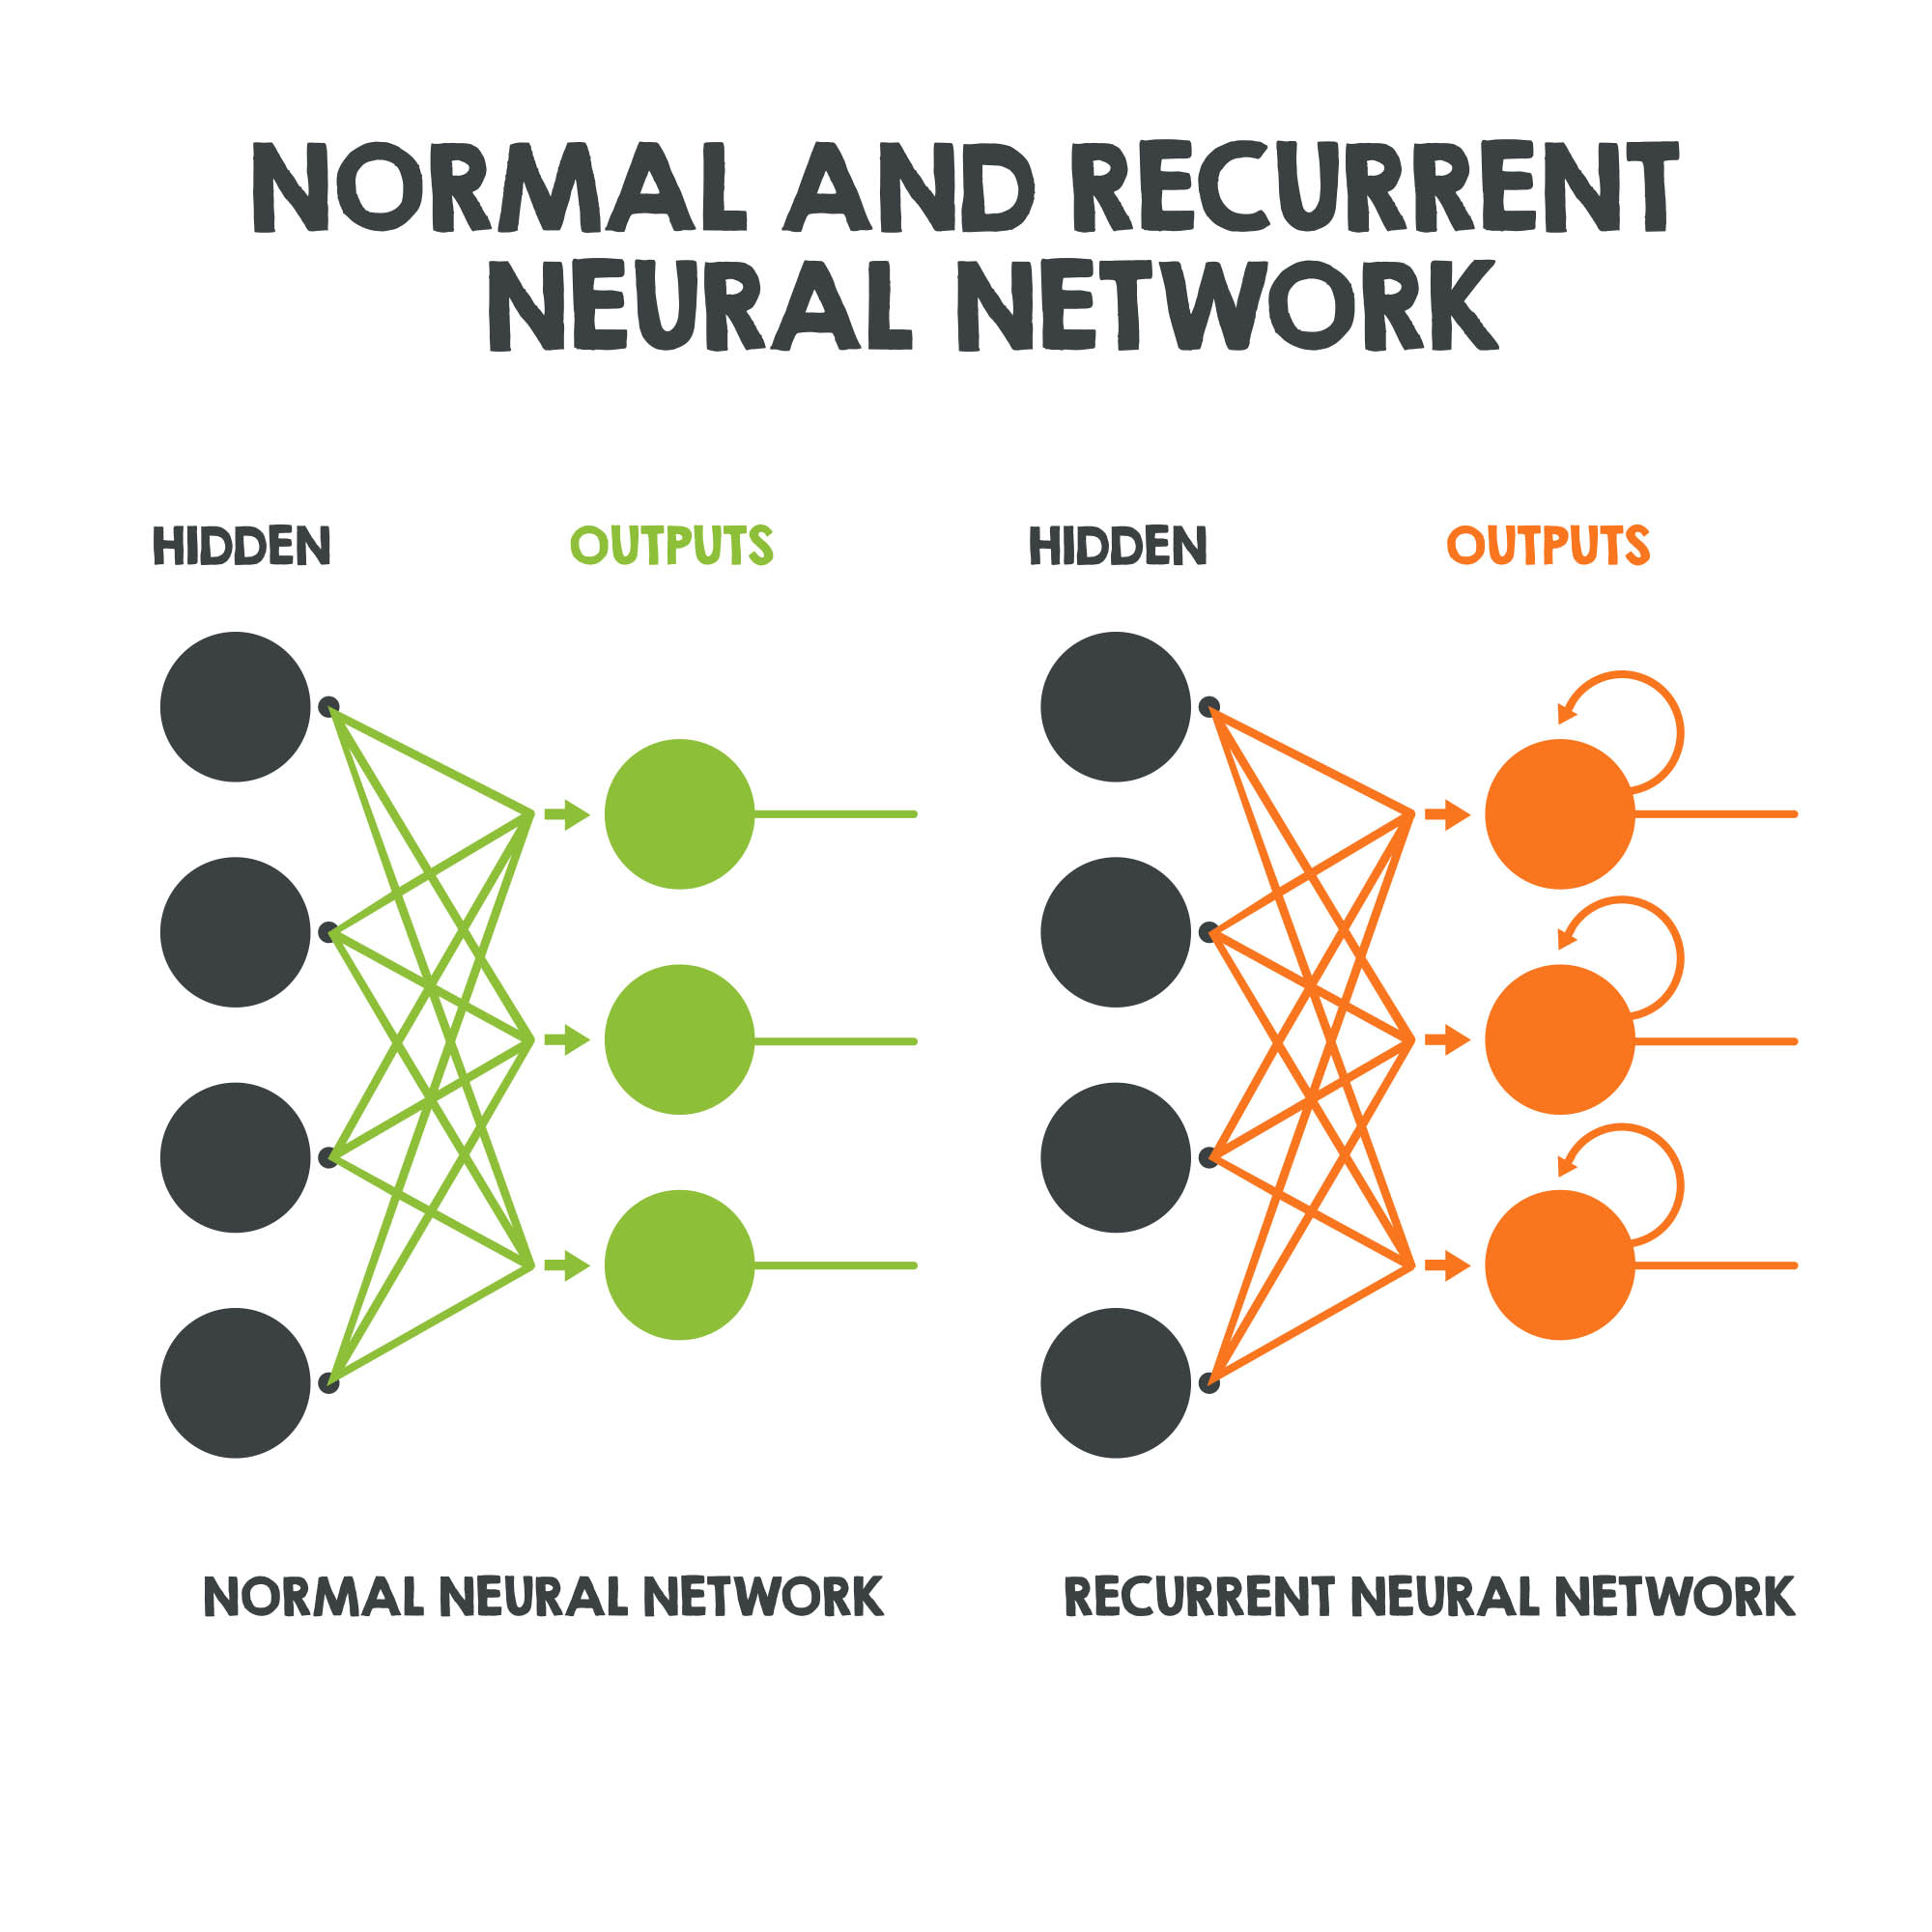 “Recurrent Neural Network” October 2021 — summary from Astrophysics Data System and Arxiv main image